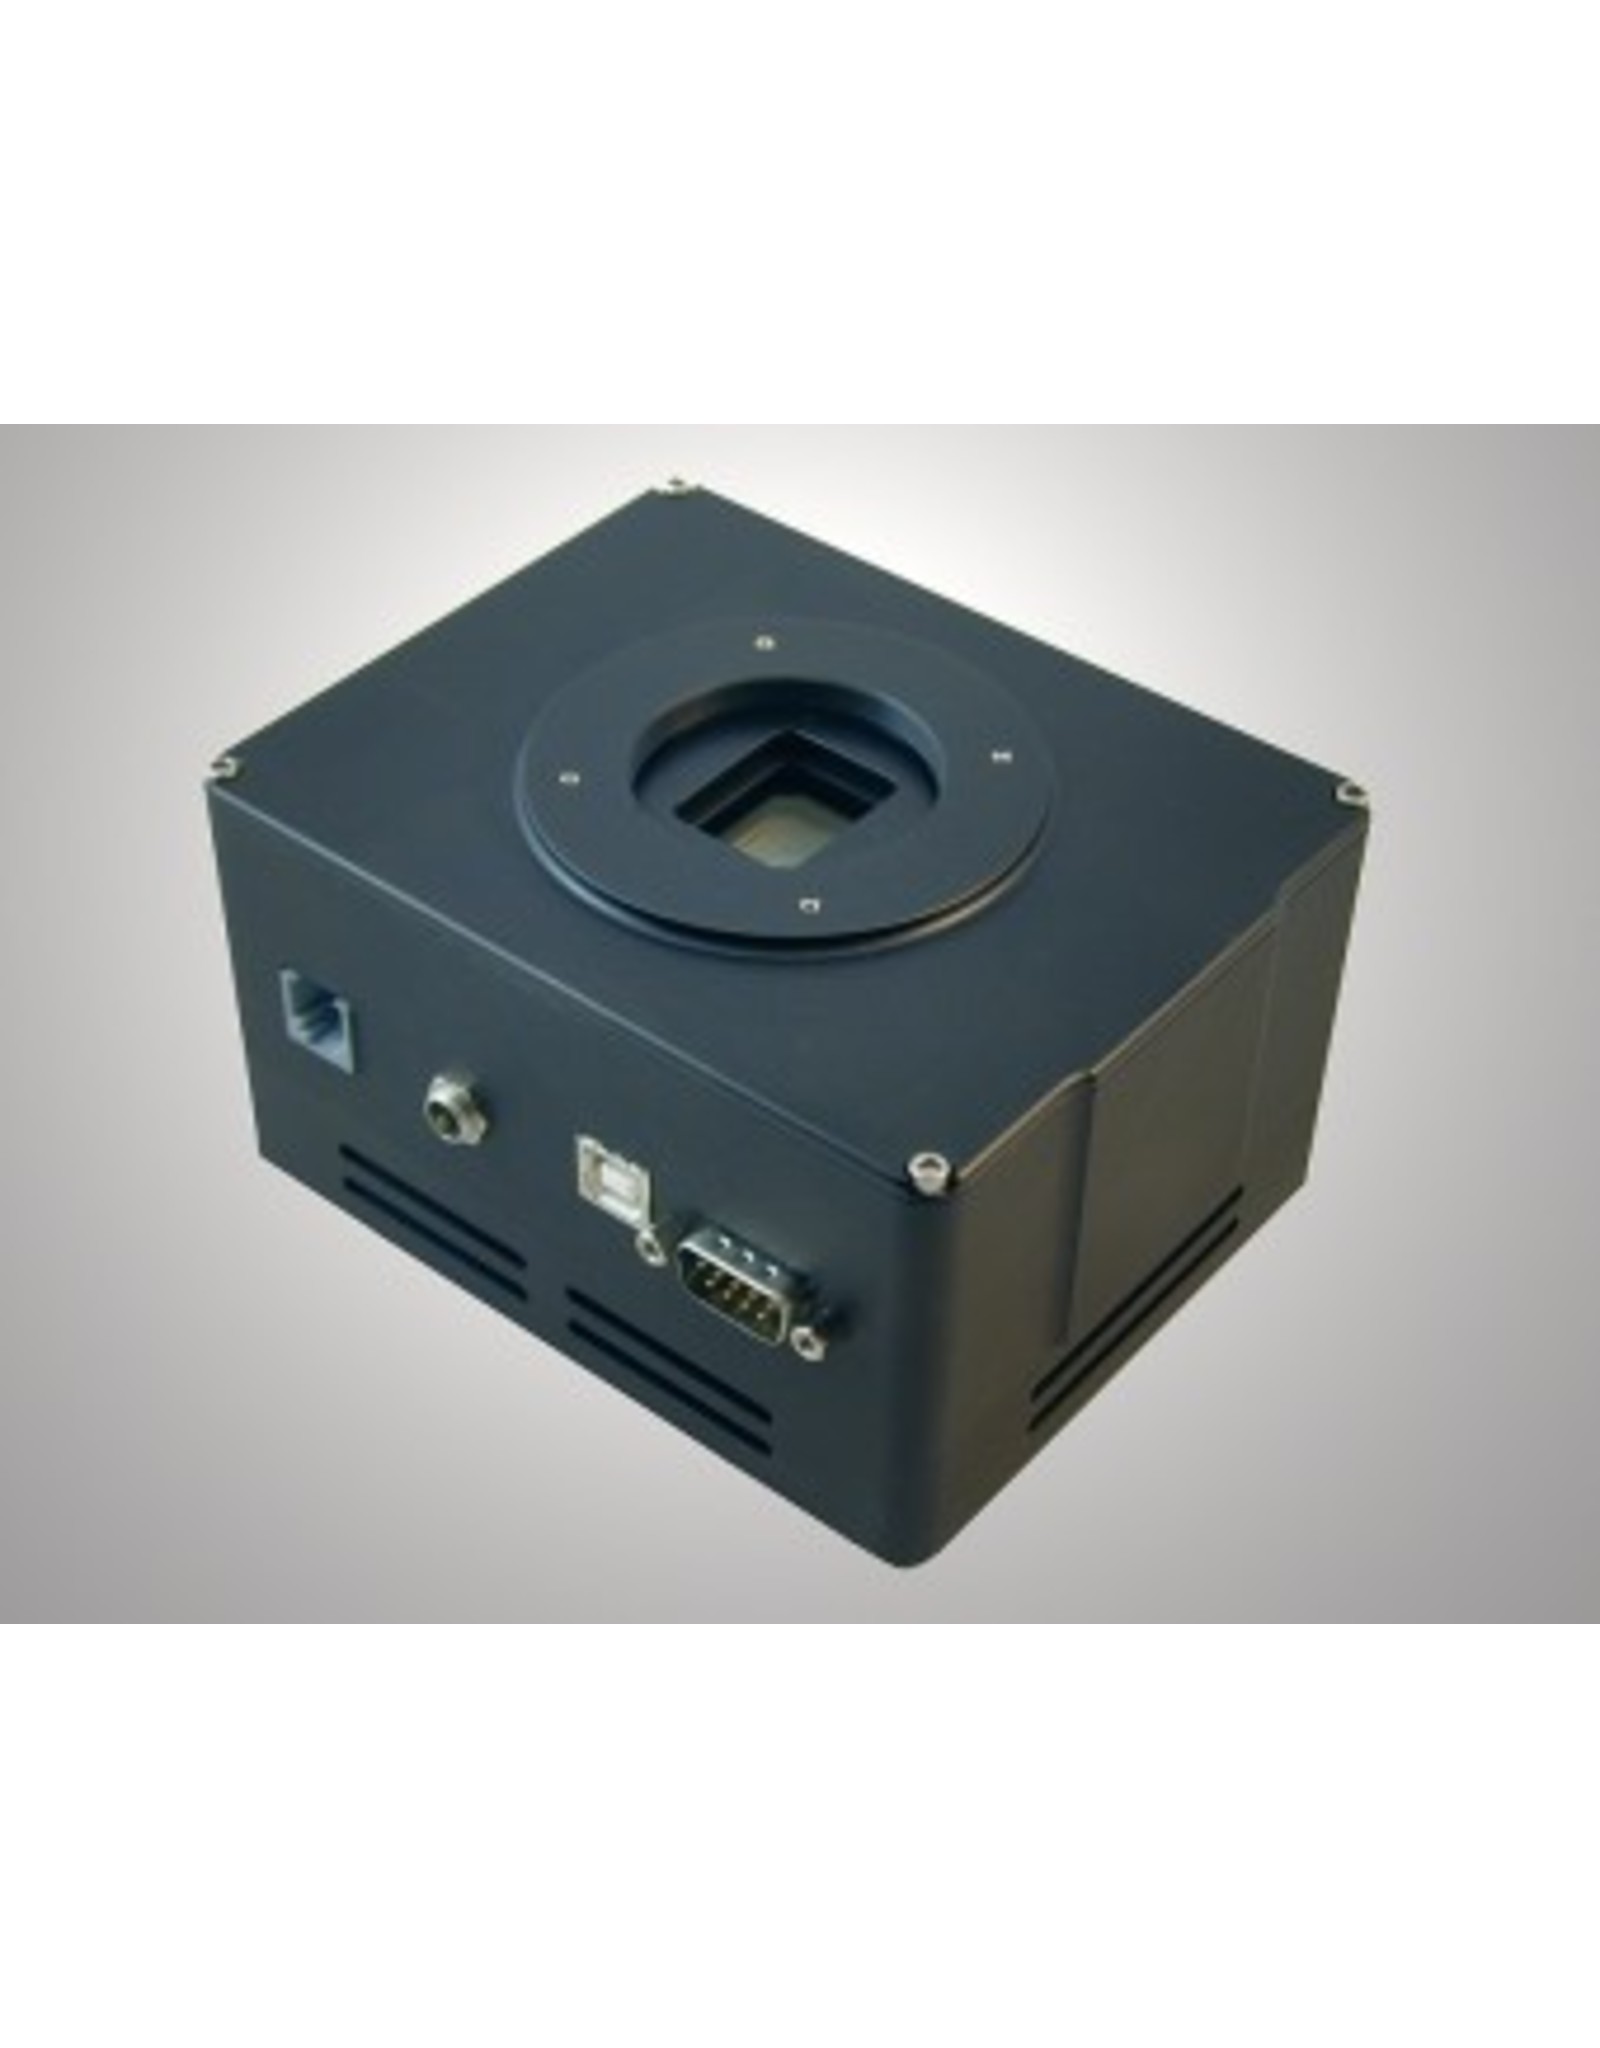 SBIG SBIG STF-8050-SC (Truesense Sparse Color) Color CCD Camera  (LIMITED AVAILABILITY)